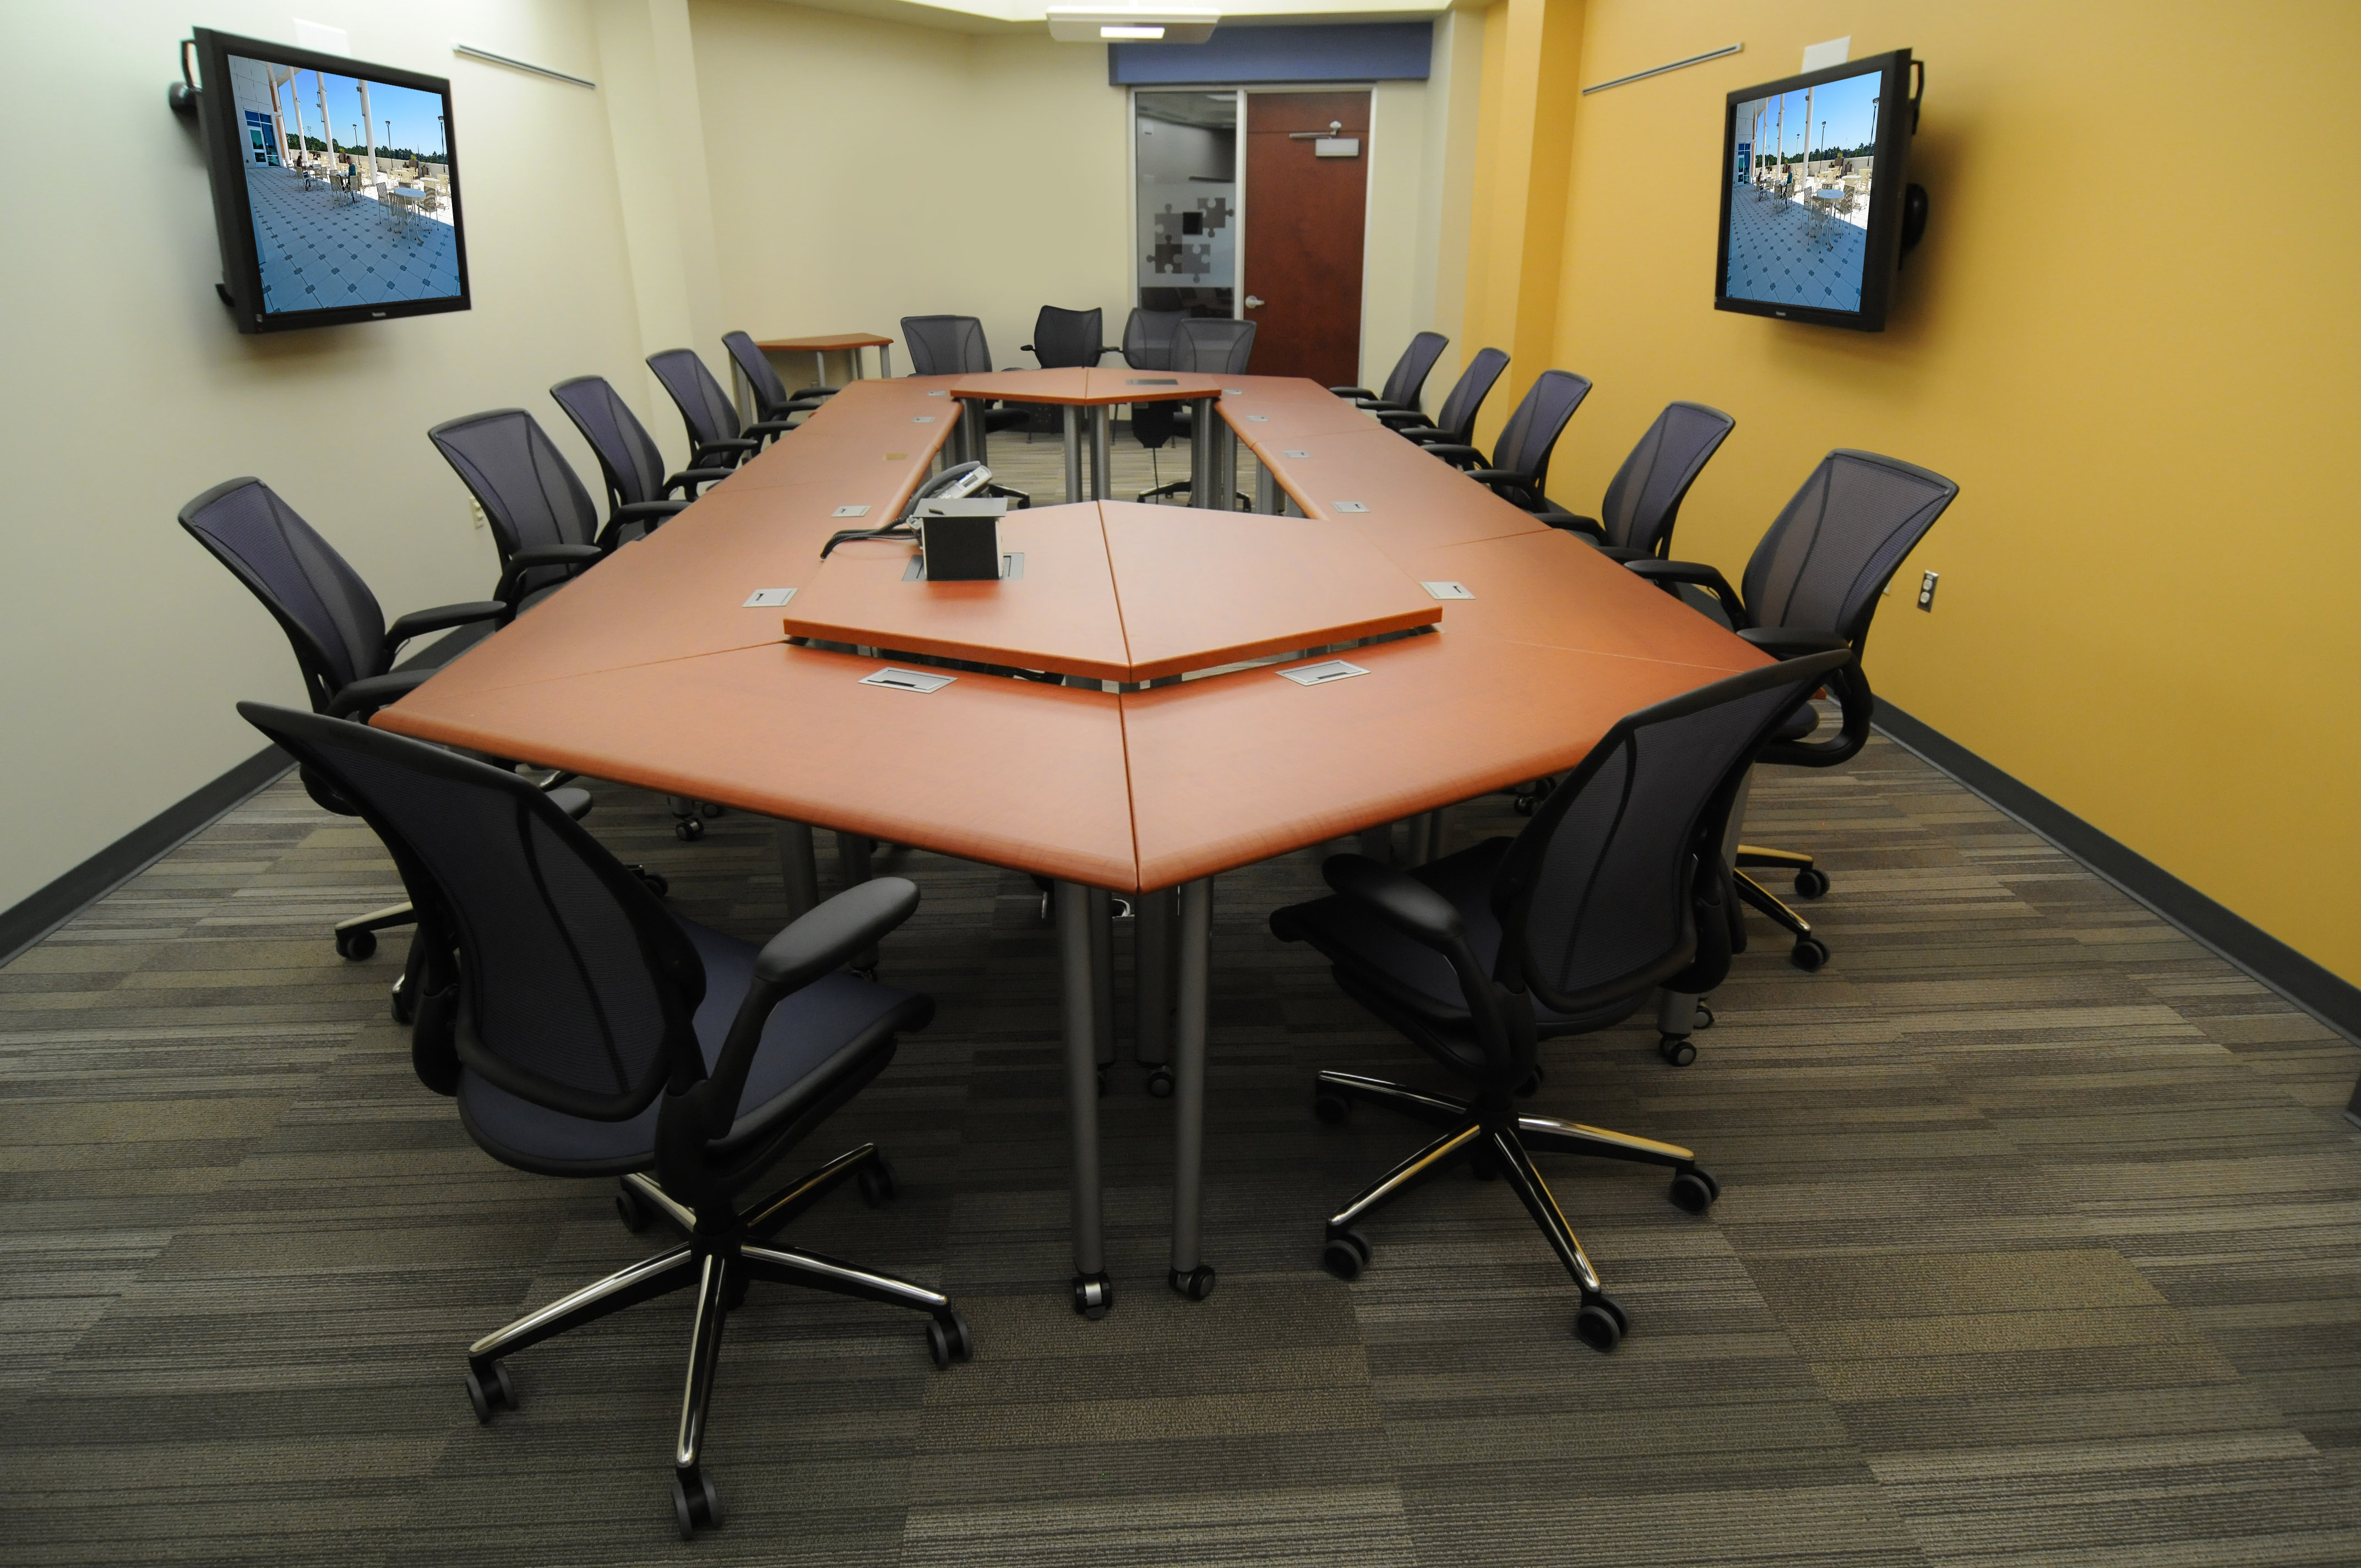 Trapezoid elements combine to form a conference table or smaller arrangements for breakouts.